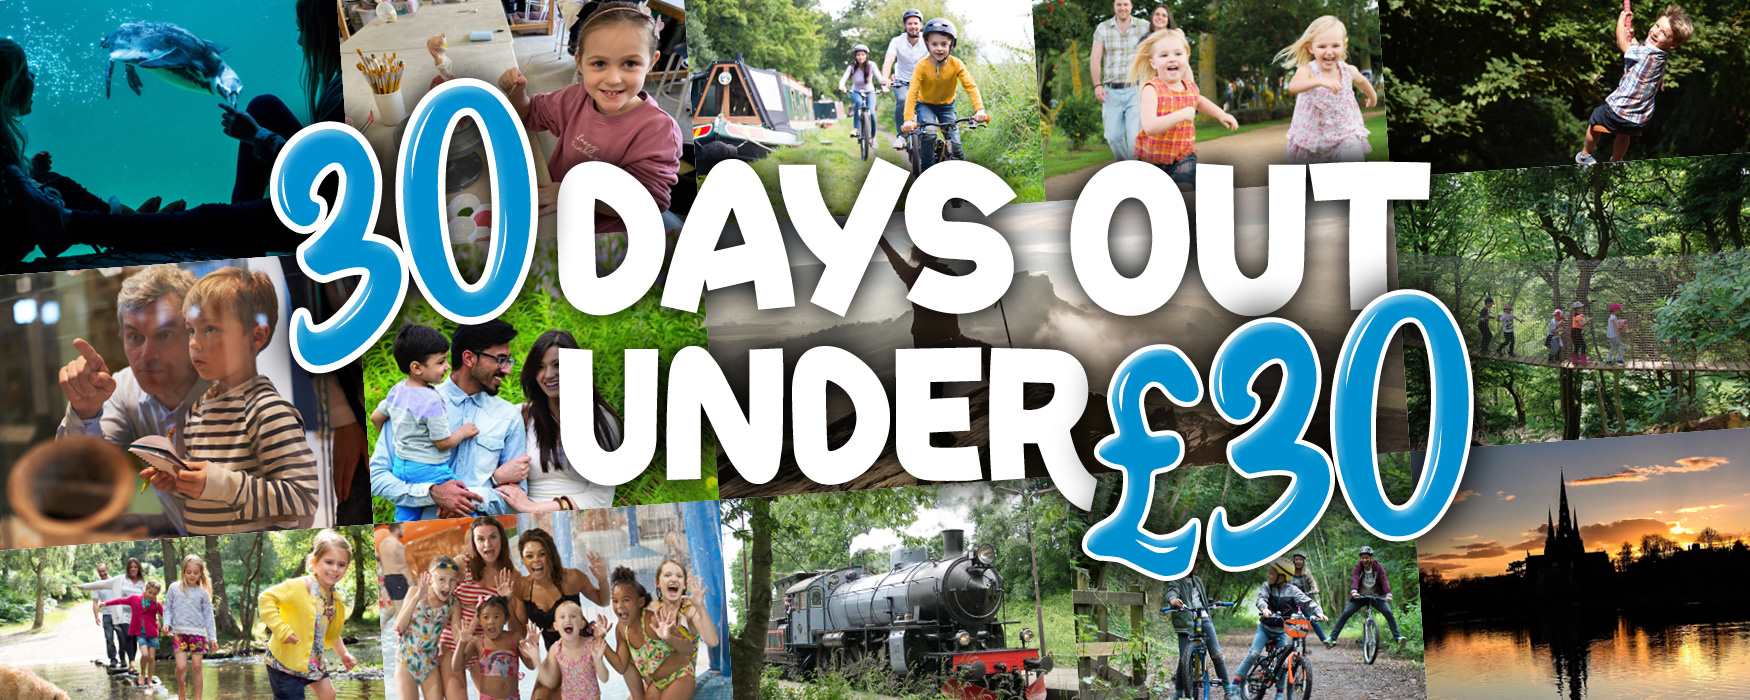 Infographic depicting 30 Days Out in Staffordshire for Under £30. Click for more information.